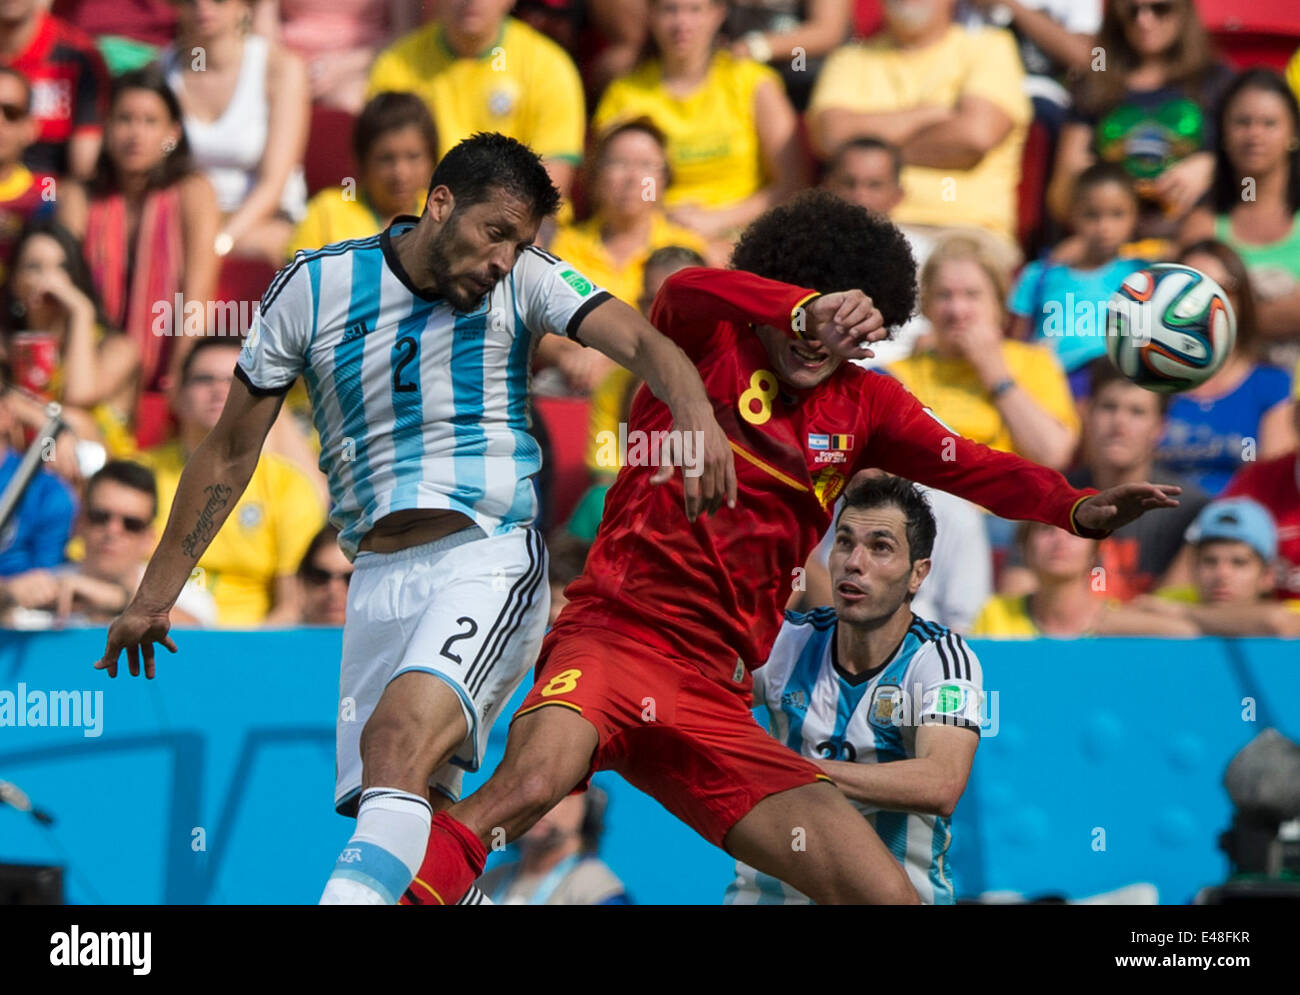 Brasilia, Brazil. 5th July, 2014. Belgium's Marouane Fellaini (R, front) vies with Argentina's Ezequiel Garay (L, front) during a quarter-finals match between Argentina and Belgium of 2014 FIFA World Cup at the Estadio Nacional Stadium in Brasilia, Brazil, on July 5, 2014. Argentina won 1-0 over Belgium and qualified for the semi-finals. Credit:  Qi Heng/Xinhua/Alamy Live News Stock Photo